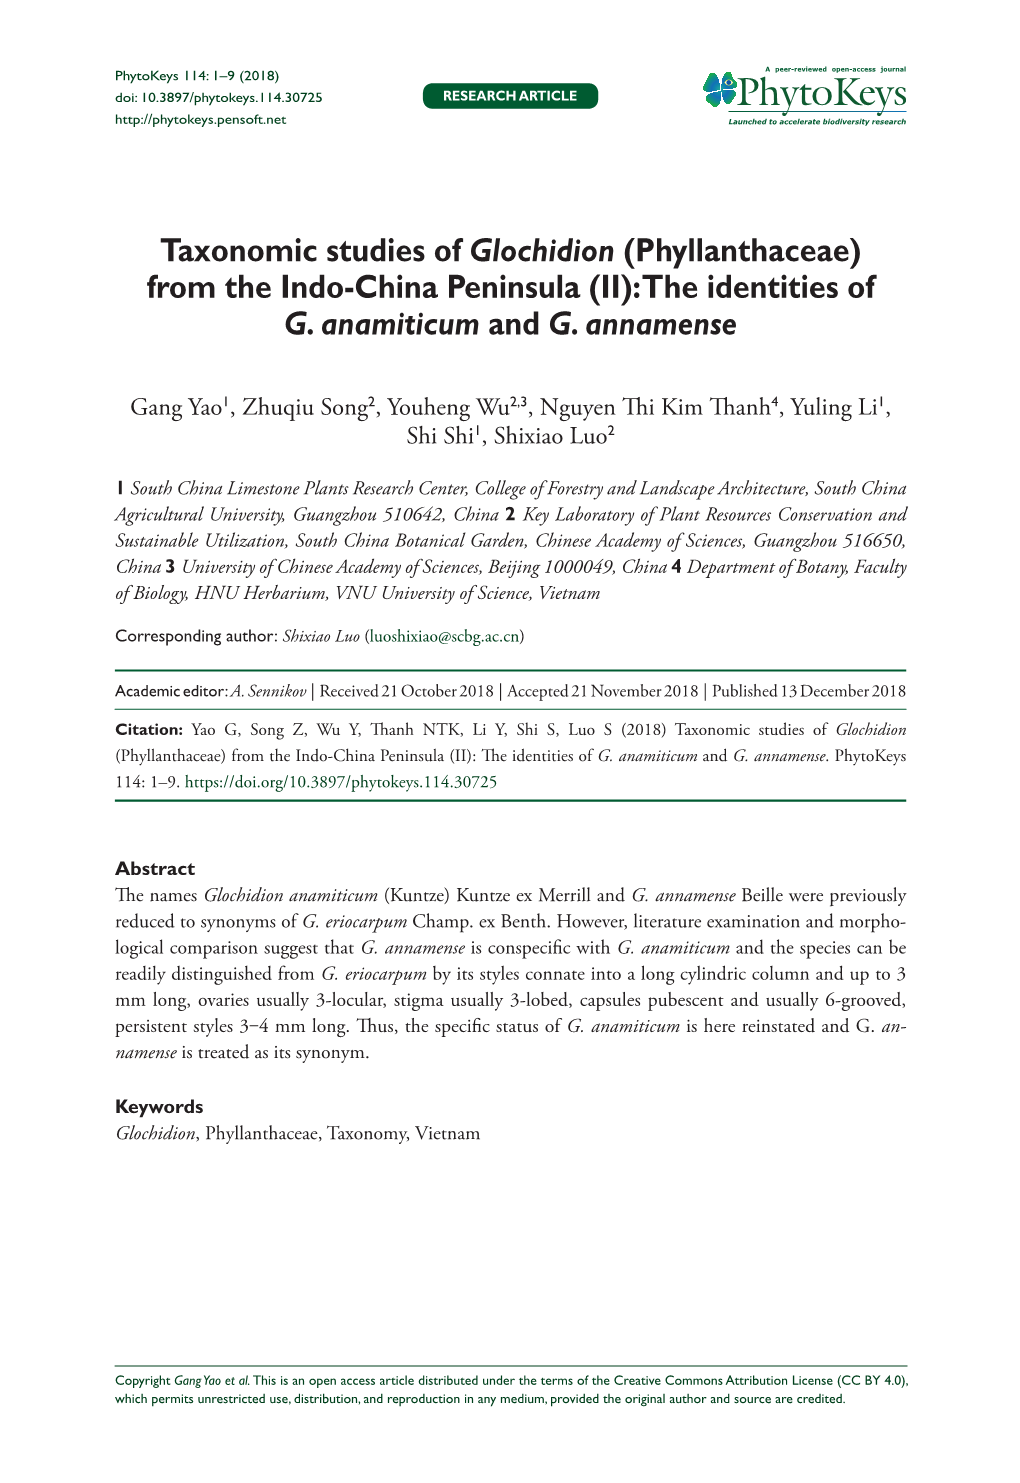 Taxonomic Studies of Glochidion (Phyllanthaceae) from the Indo-China Peninsula (II): the Identities of G